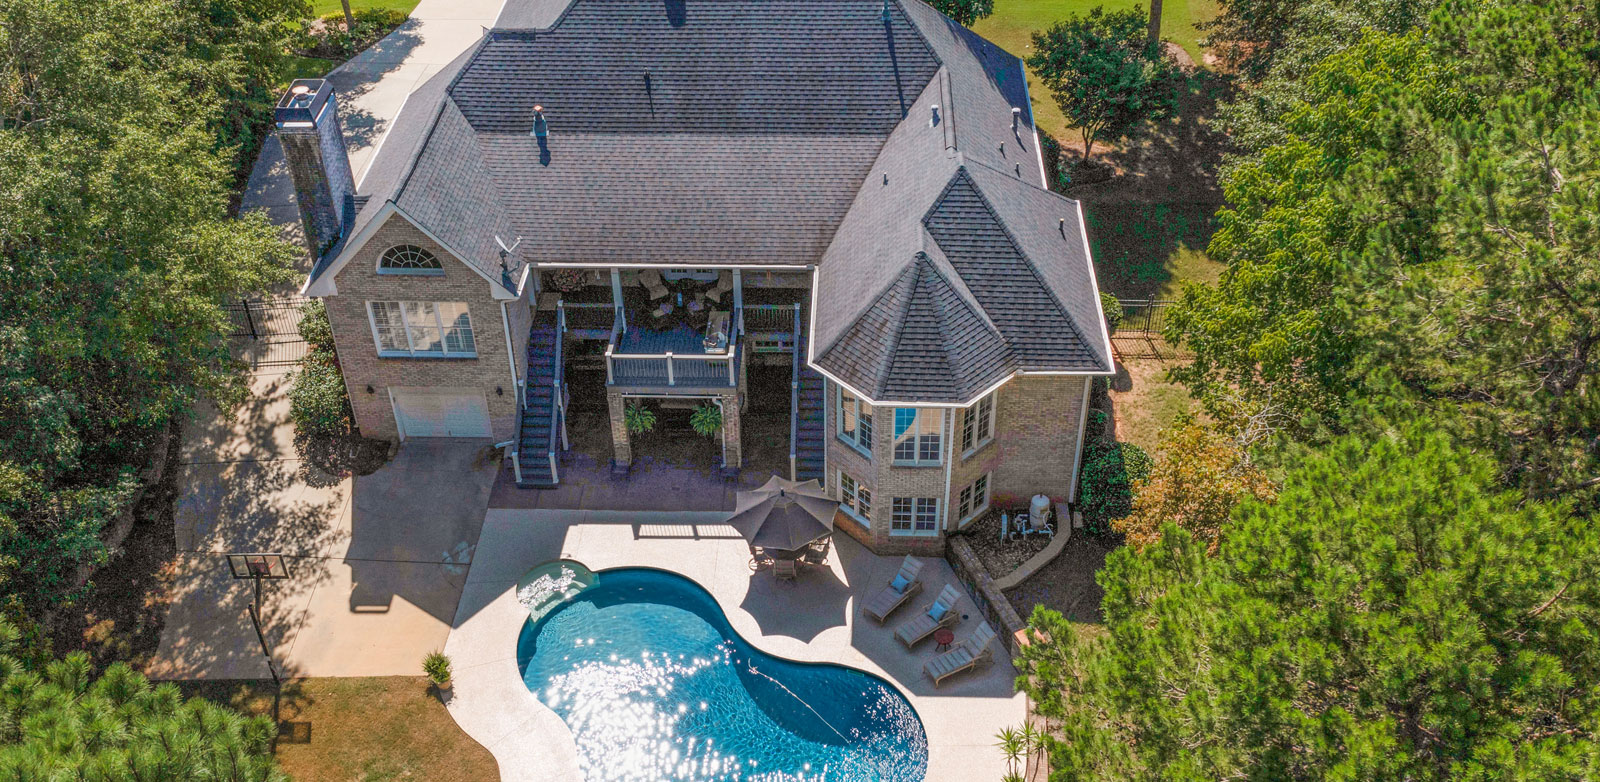 Home with outdoor pool aerial shot